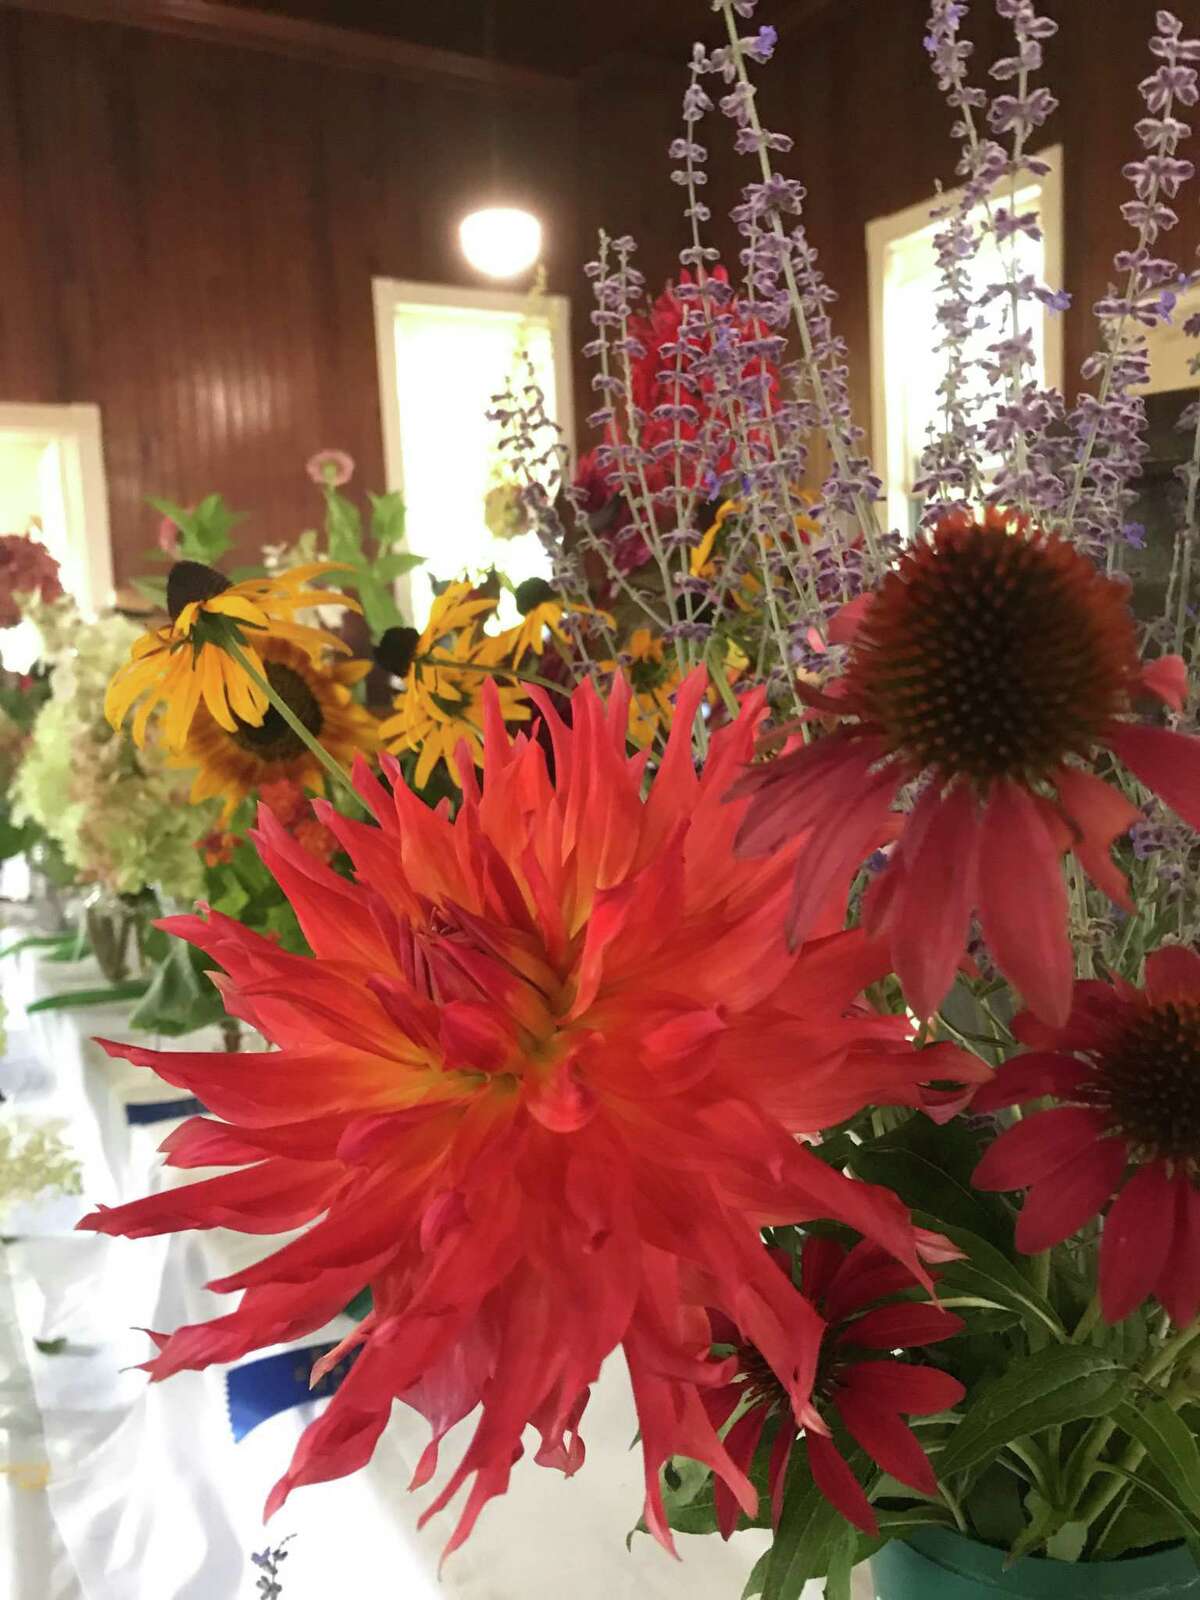 Flowers, such as these from last year’s fair, will be judged again at this year’s Cannon Grange agricultural fair and exposition, which will be held virtually on Sunday, Aug. 30.